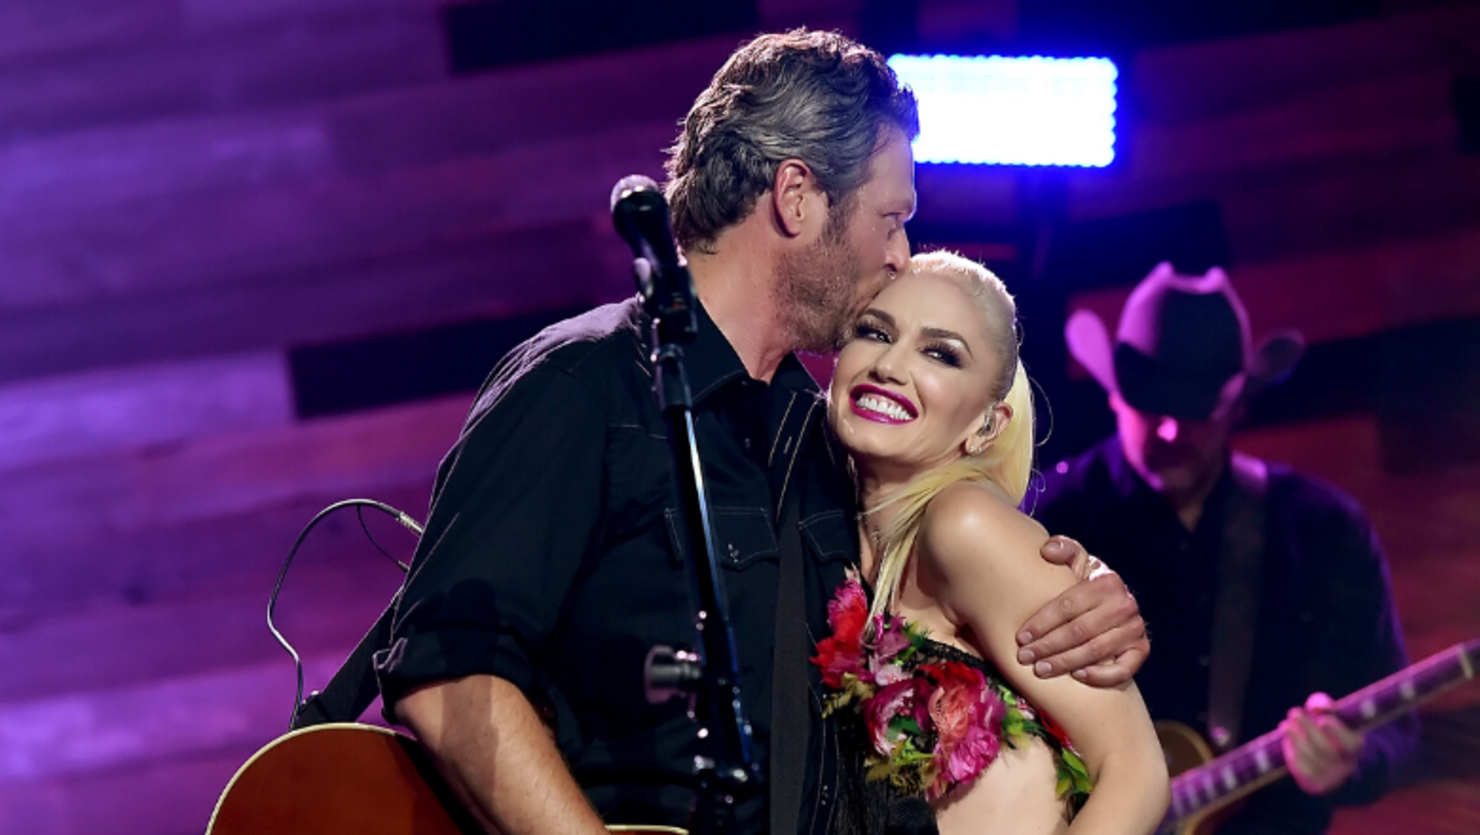 Blake Shelton And Gwen Stefani To Release New Duet, 'Happy Anywhere'